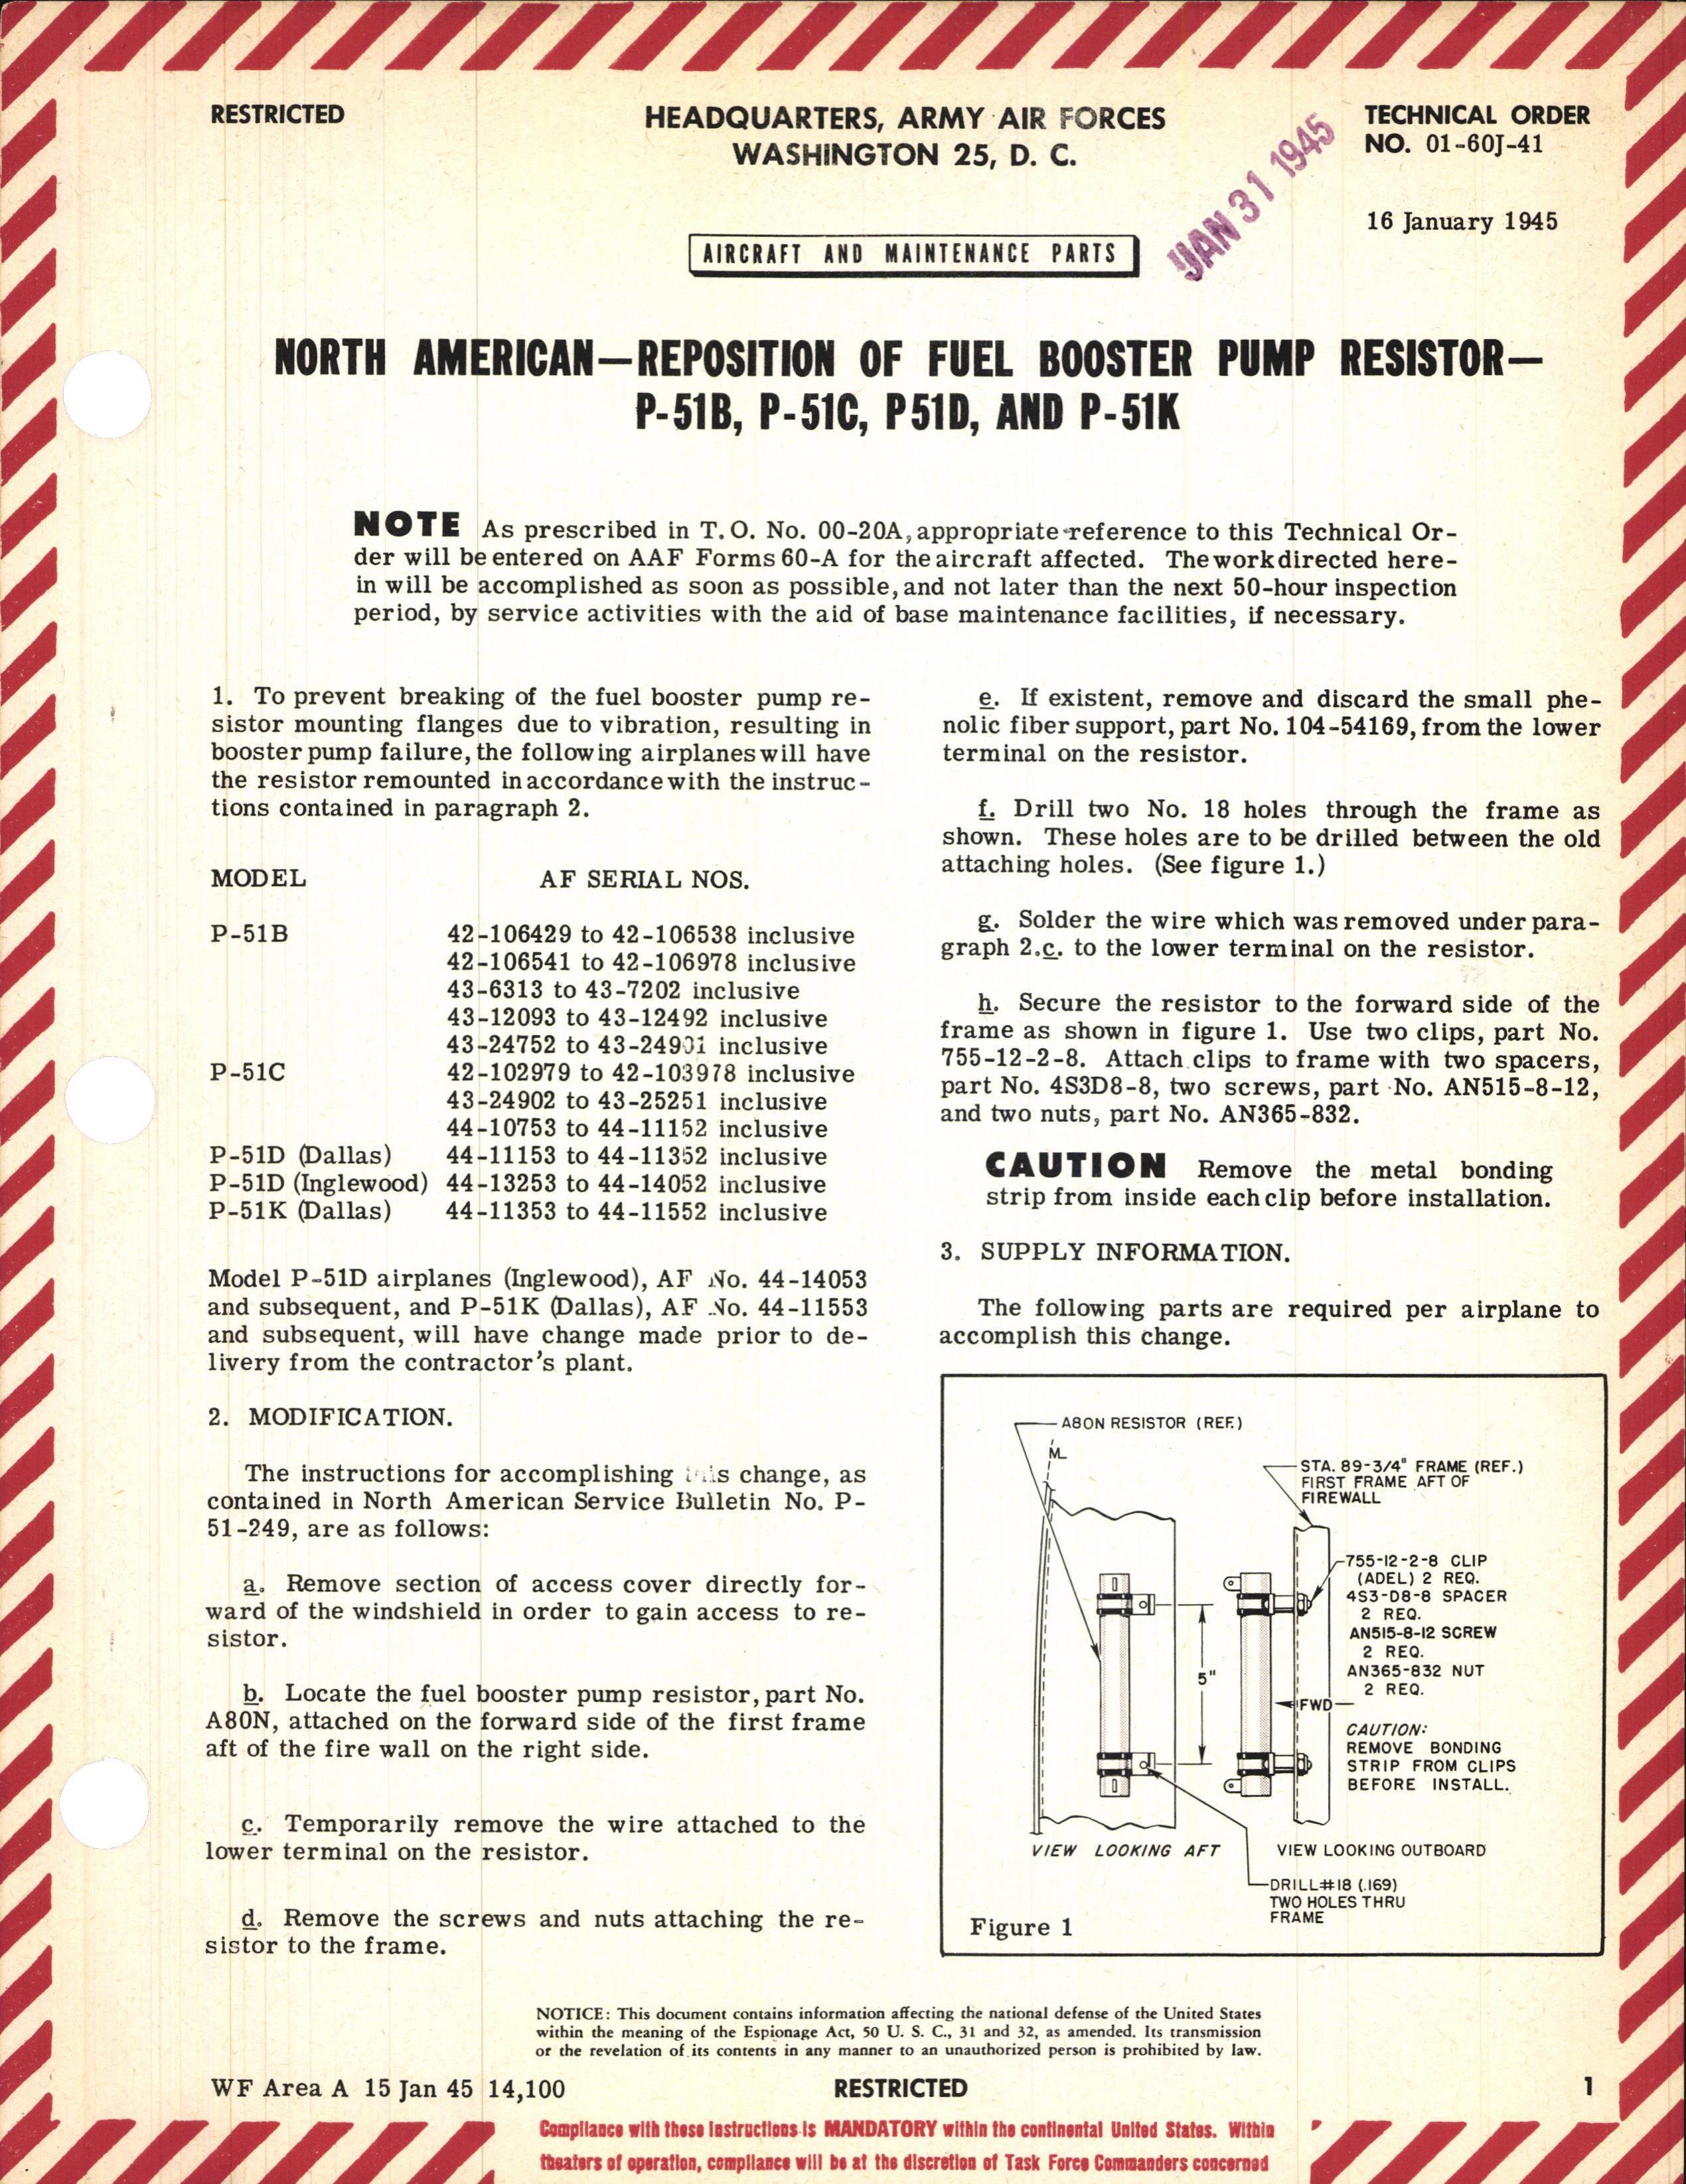 Sample page 1 from AirCorps Library document: Reposition of Fuel Booster Pump Resistor for P-51B, C, D, and K